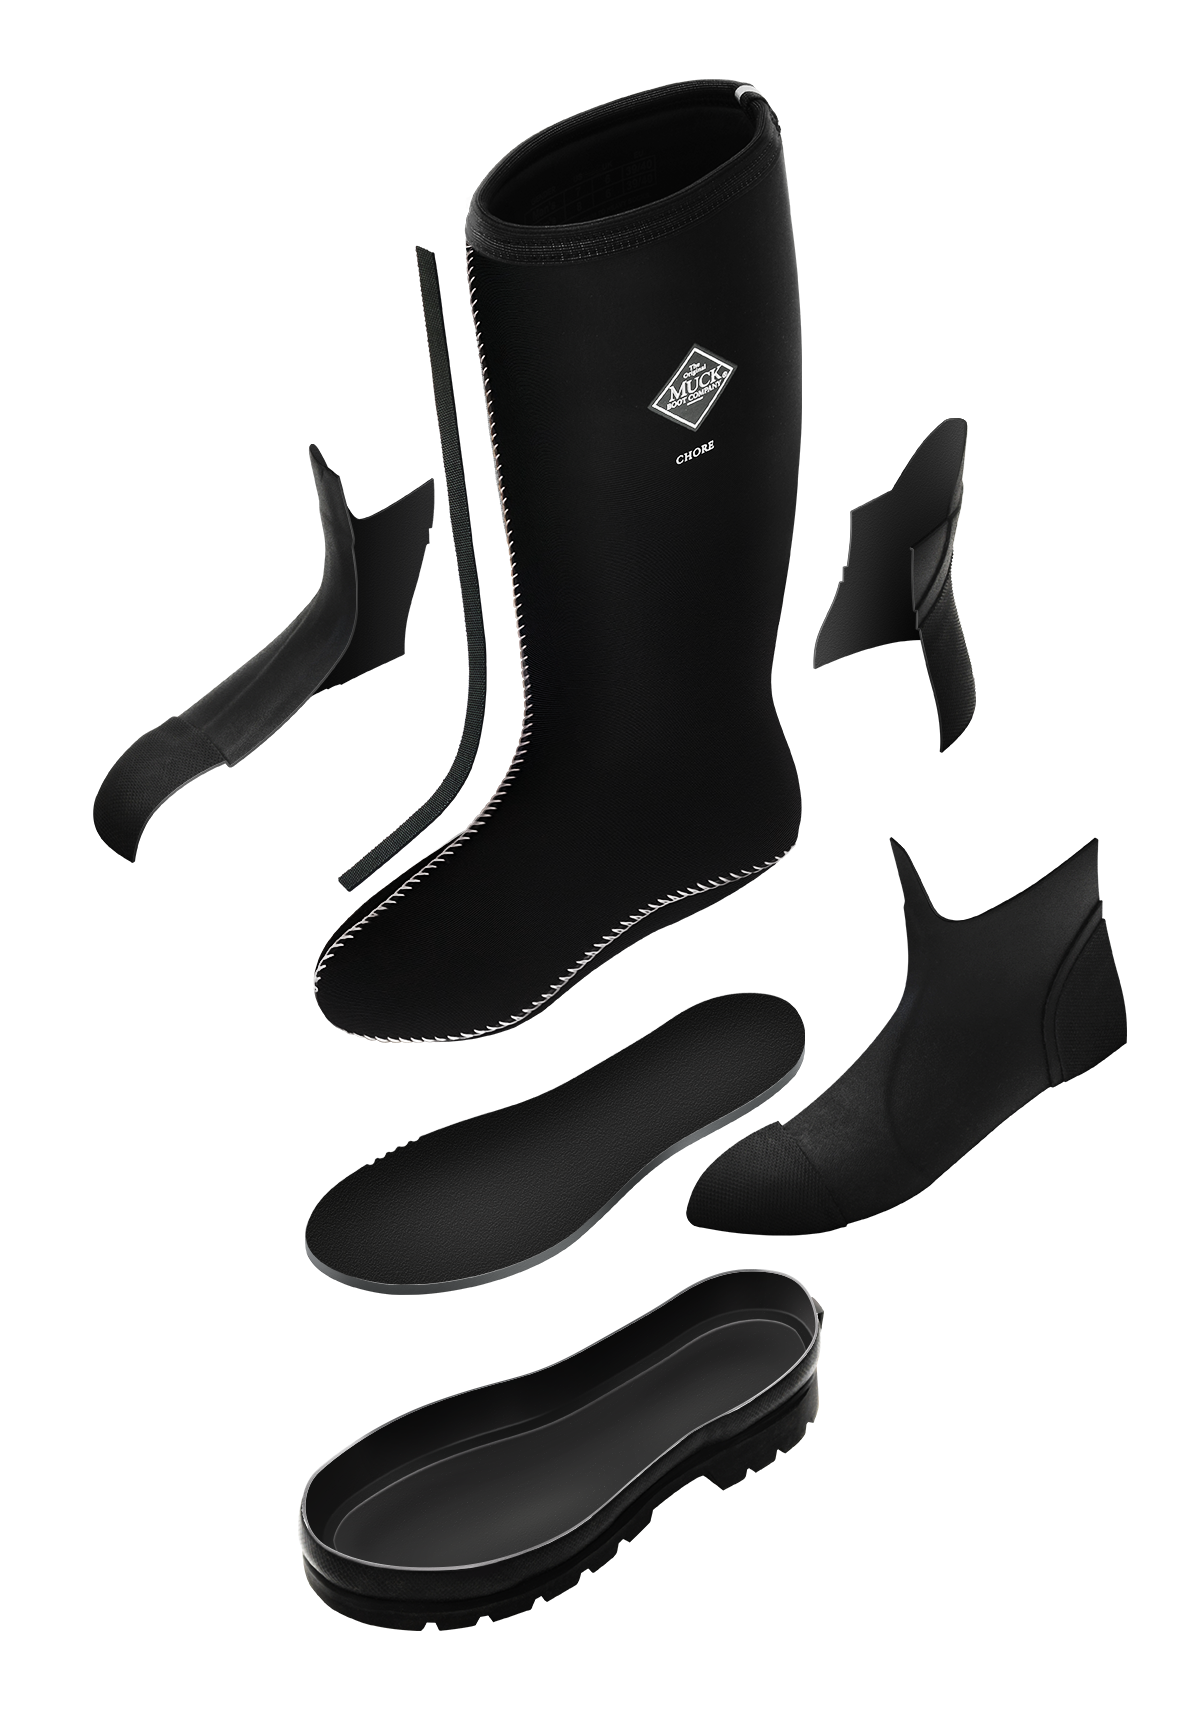 Illustration of deconstructed boot to show how features fit together